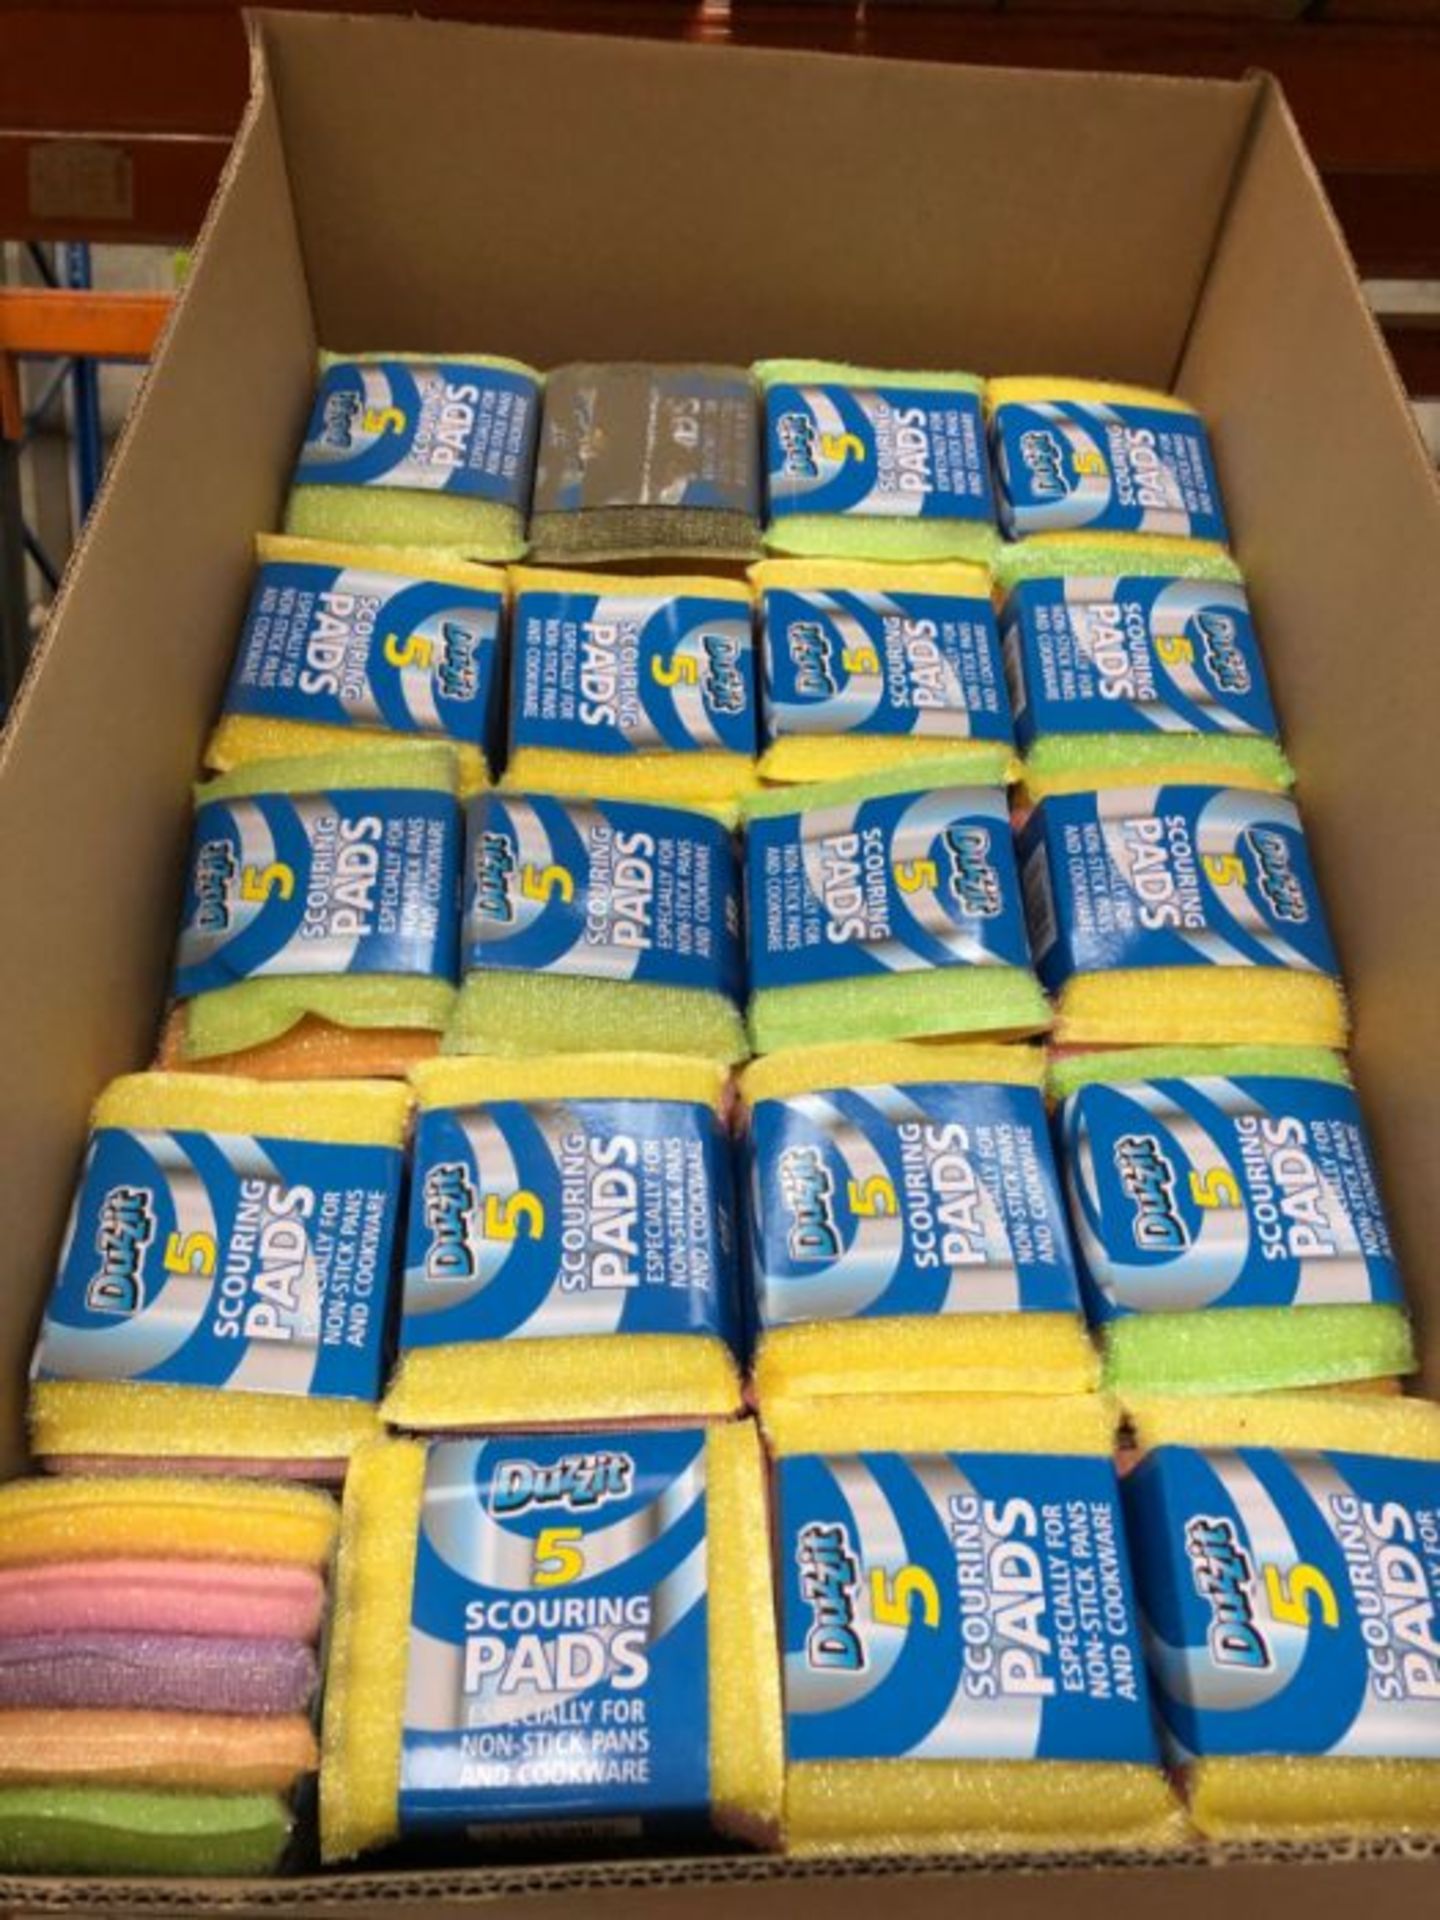 20 X PACKS OF DUZZIT SCOURING PADS - 5 PADS PER PACK / AS NEW